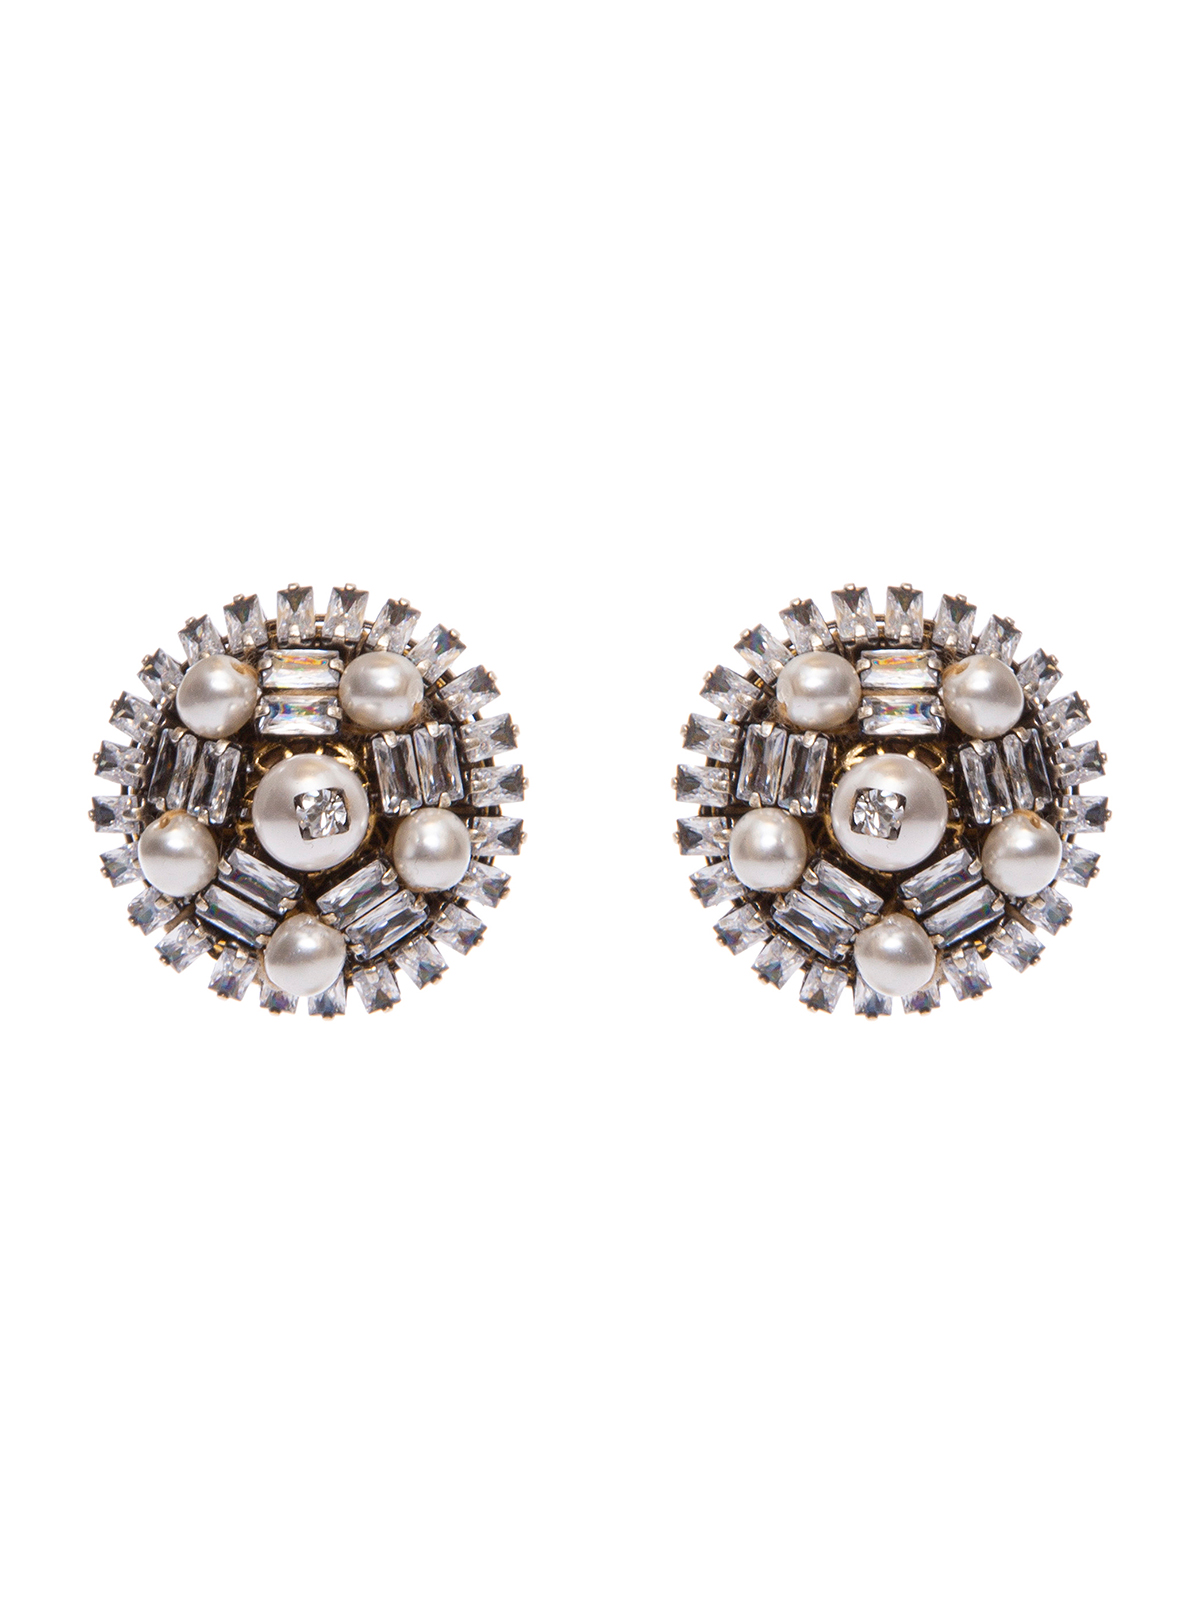 Button earrings embroidered with stones and pearls